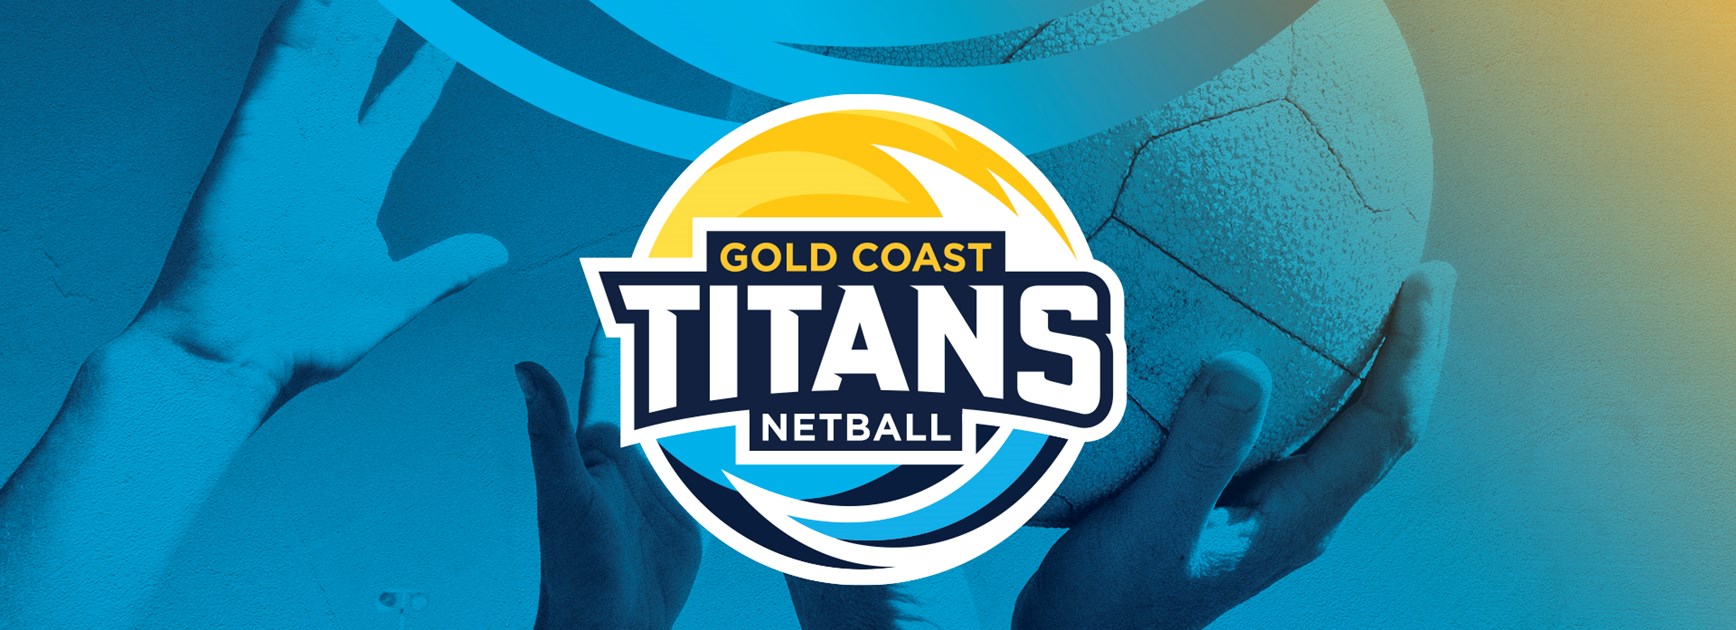 Welcome to Titans Netball